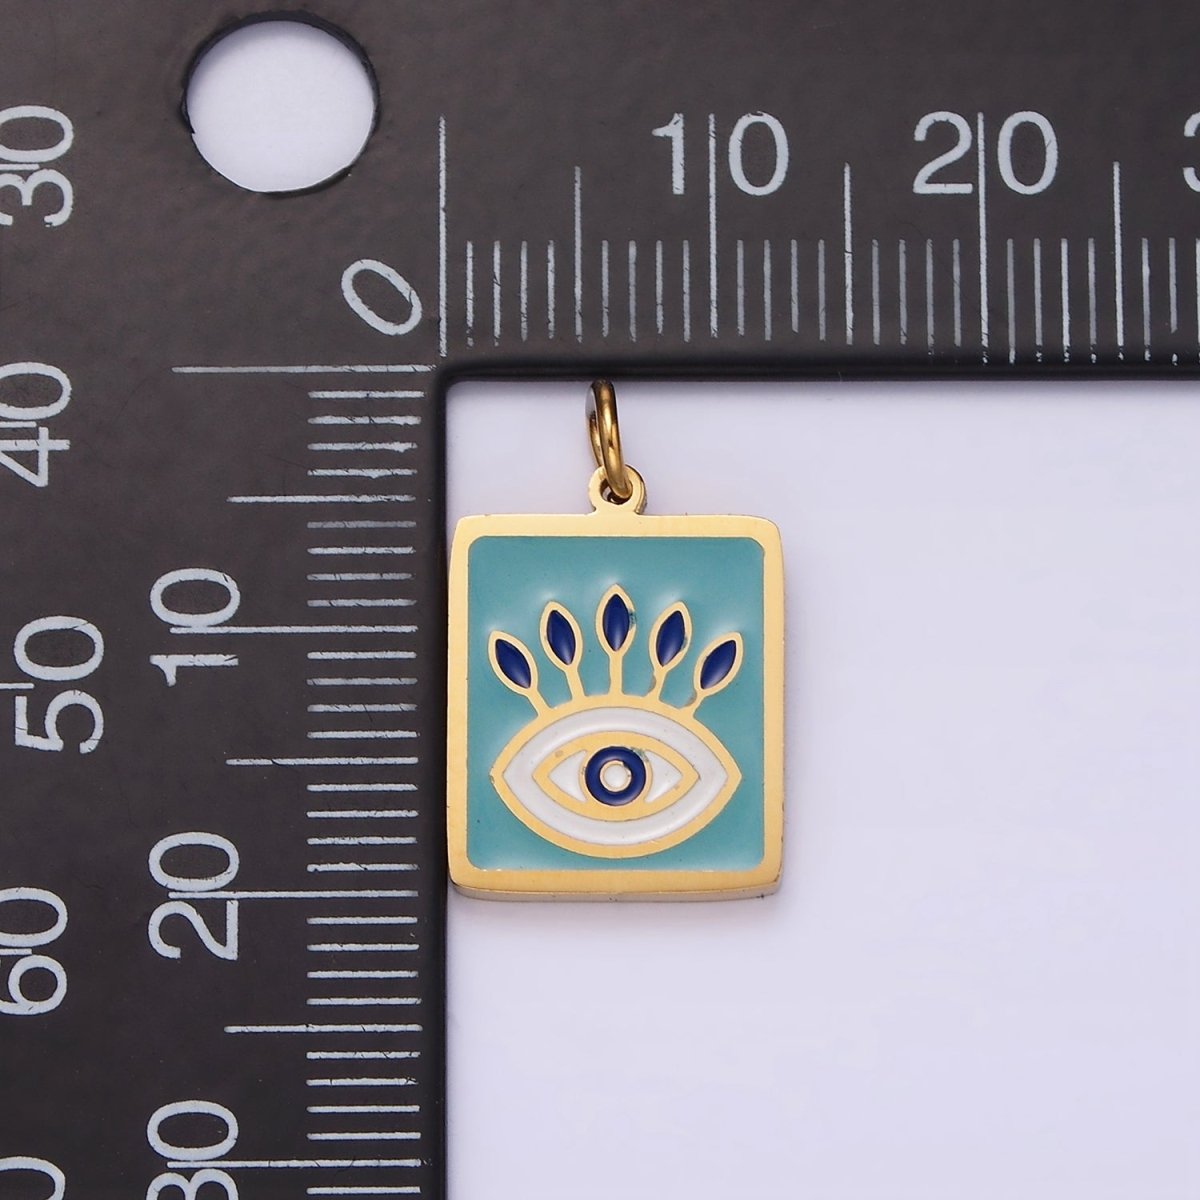 Stainless Steel Gold Eye Pendant Charm for Necklace Bracelet Teal Blue Enamel Jewelry | P-633 - DLUXCA